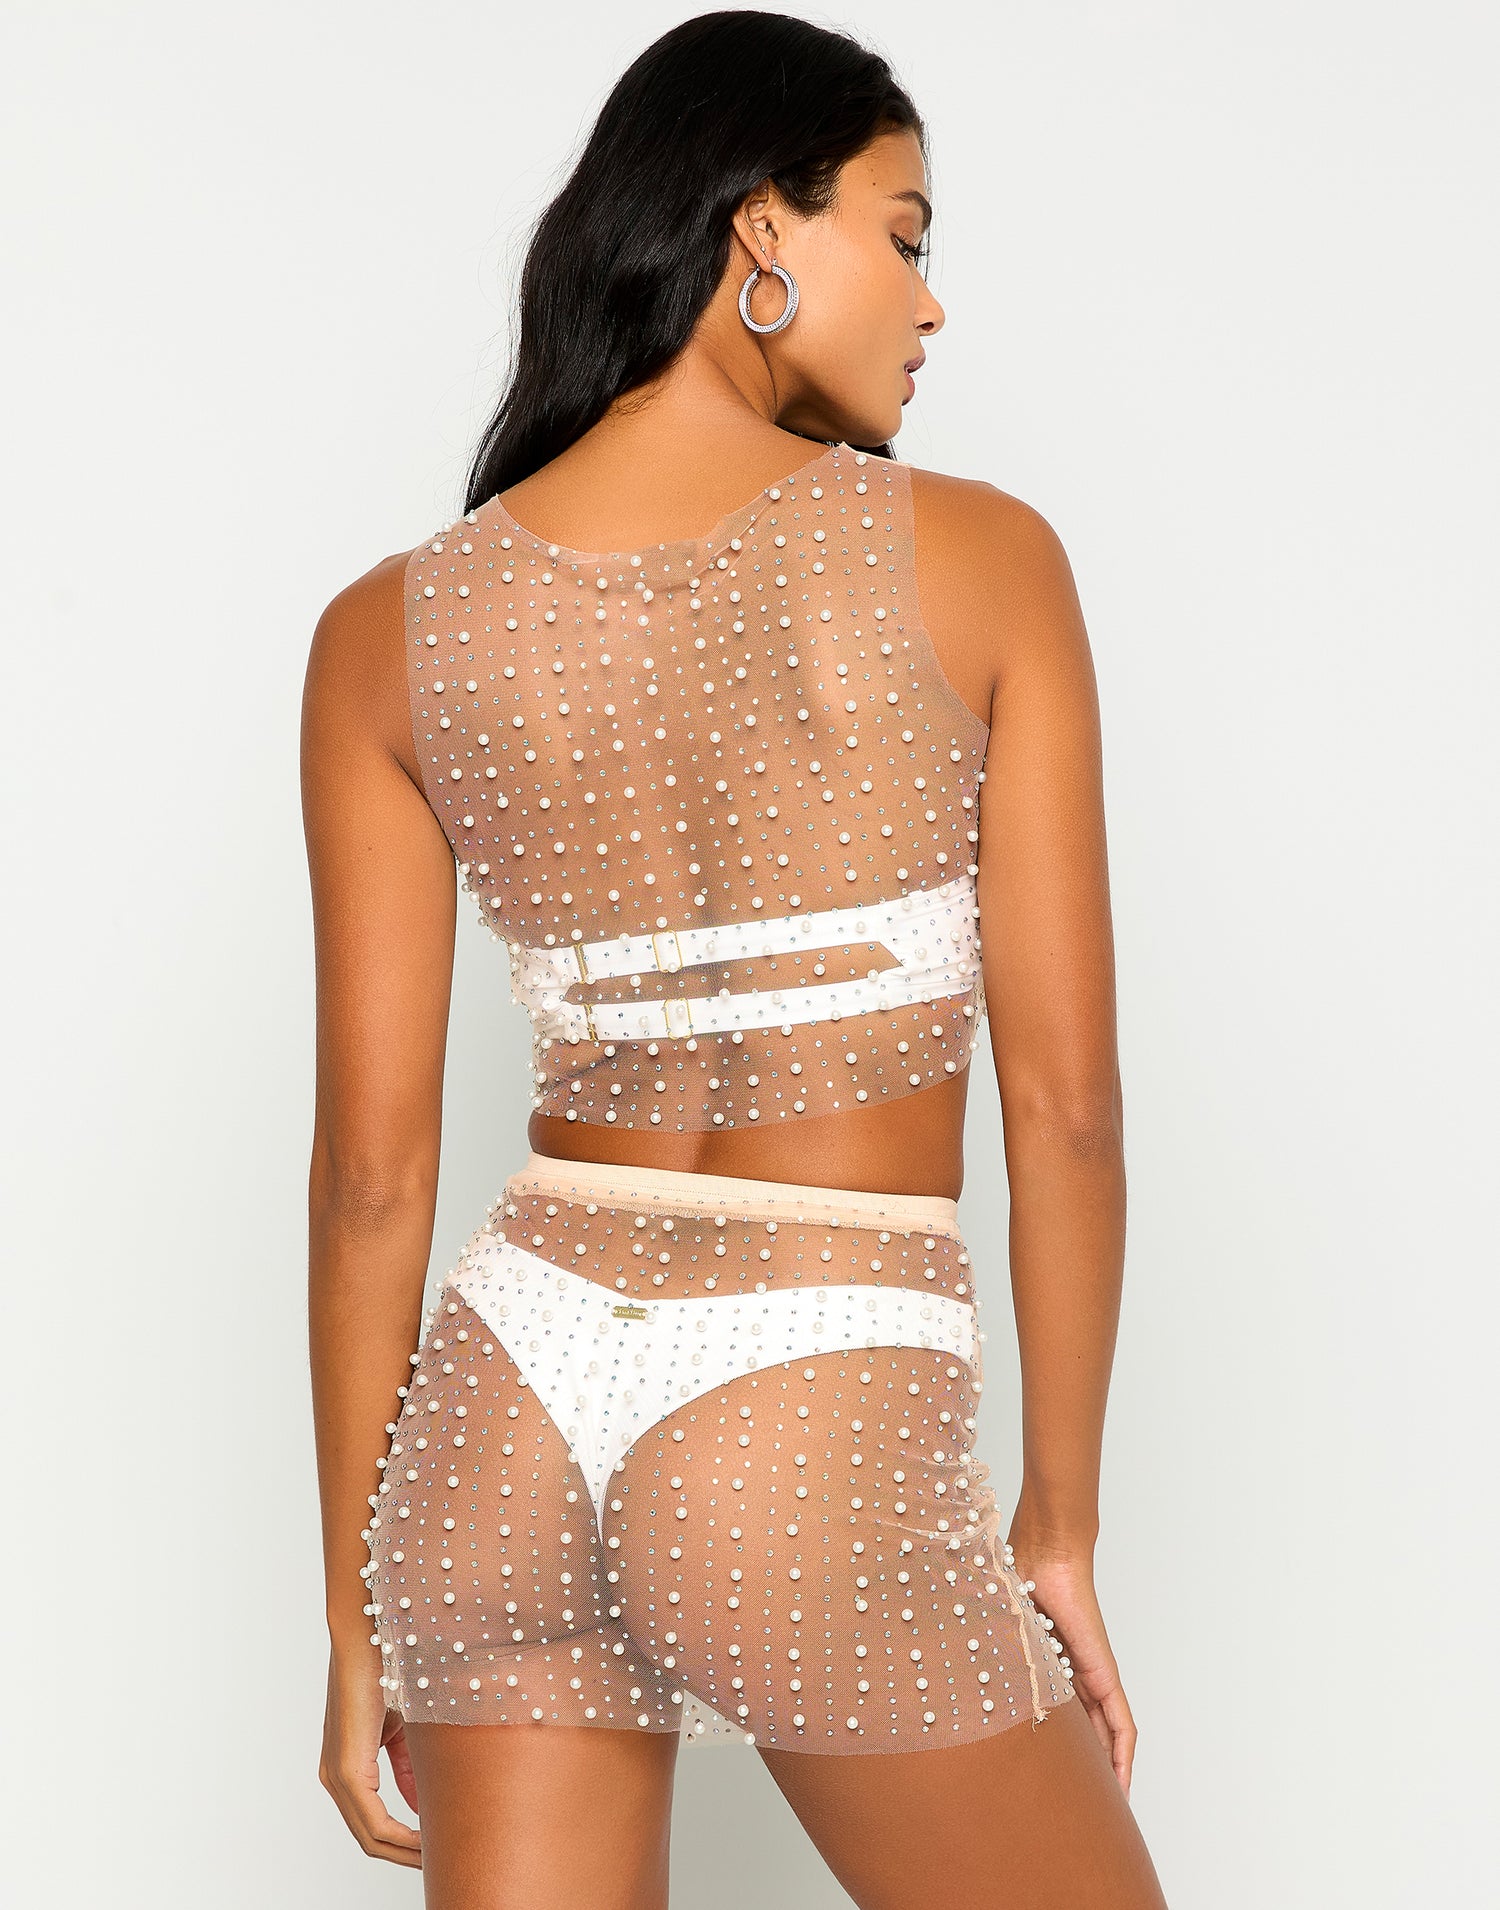 Glitzy Girl Mesh Pearl Cover Up Top & Skirt Set in Nude with Rhinestone Detail - Alternate Back View